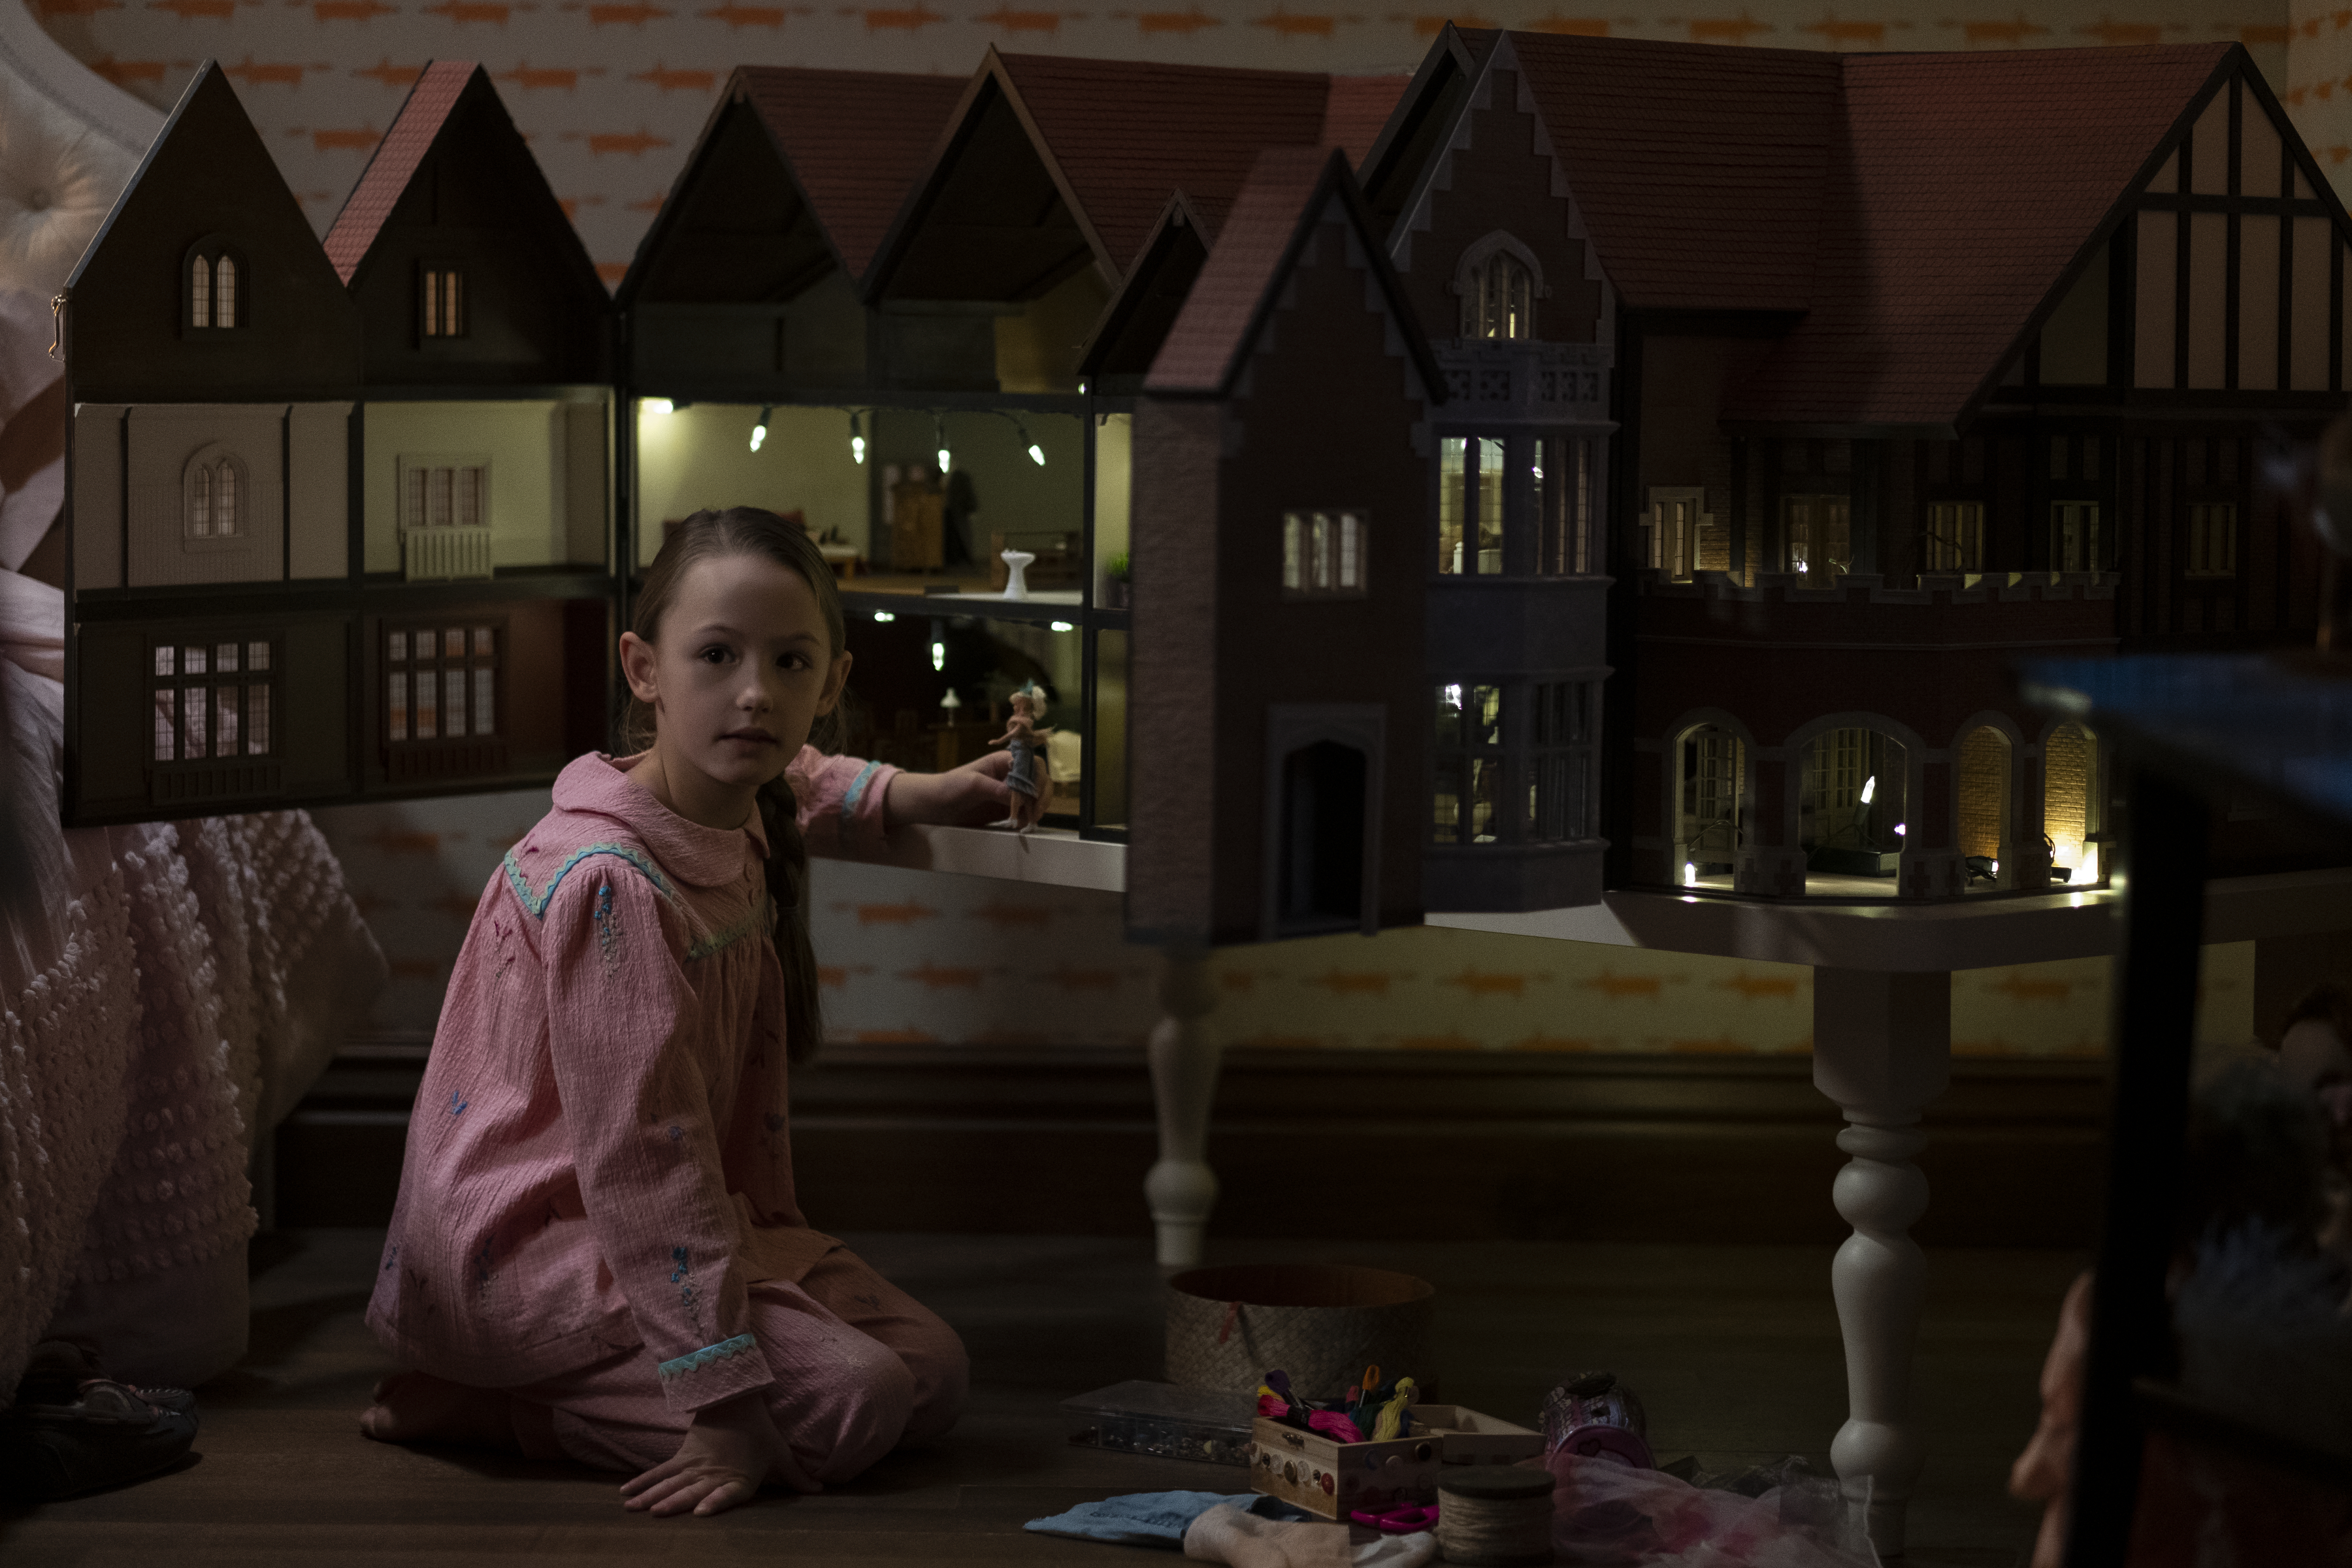 HE HAUNTING OF BLY MANOR (L to R) AMELIE SMITH as FLORA in episode 101 of THE HAUNTING OF BLY MANOR Cr. EIKE SCHROTER/NETFLIX © 2020